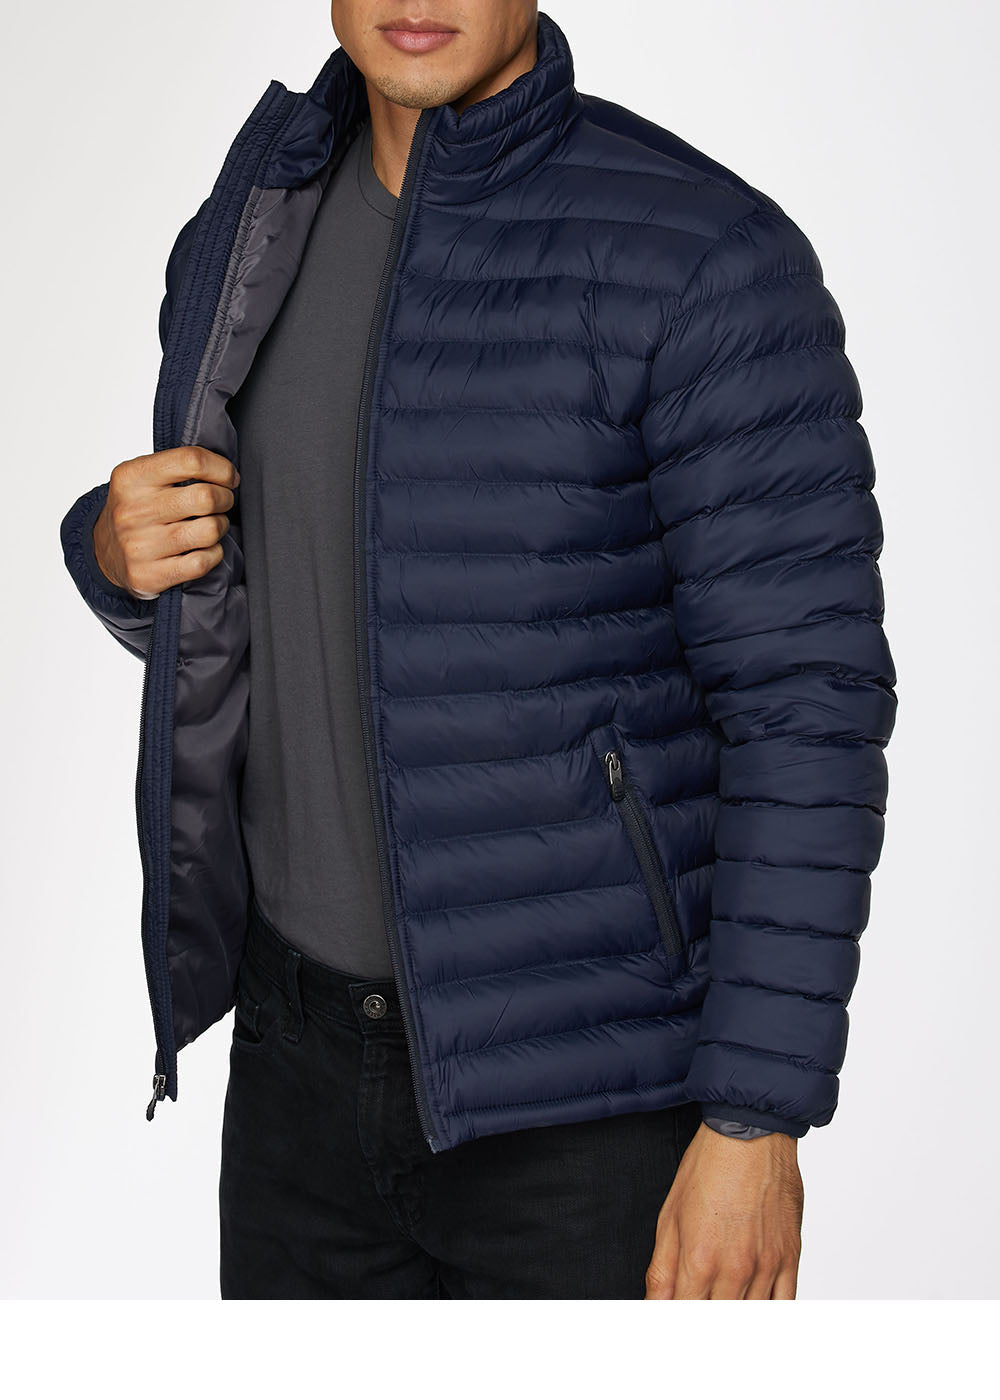 Men's Nylon Quilted Puffer Jacket -NJ640-Navy per Piece Value